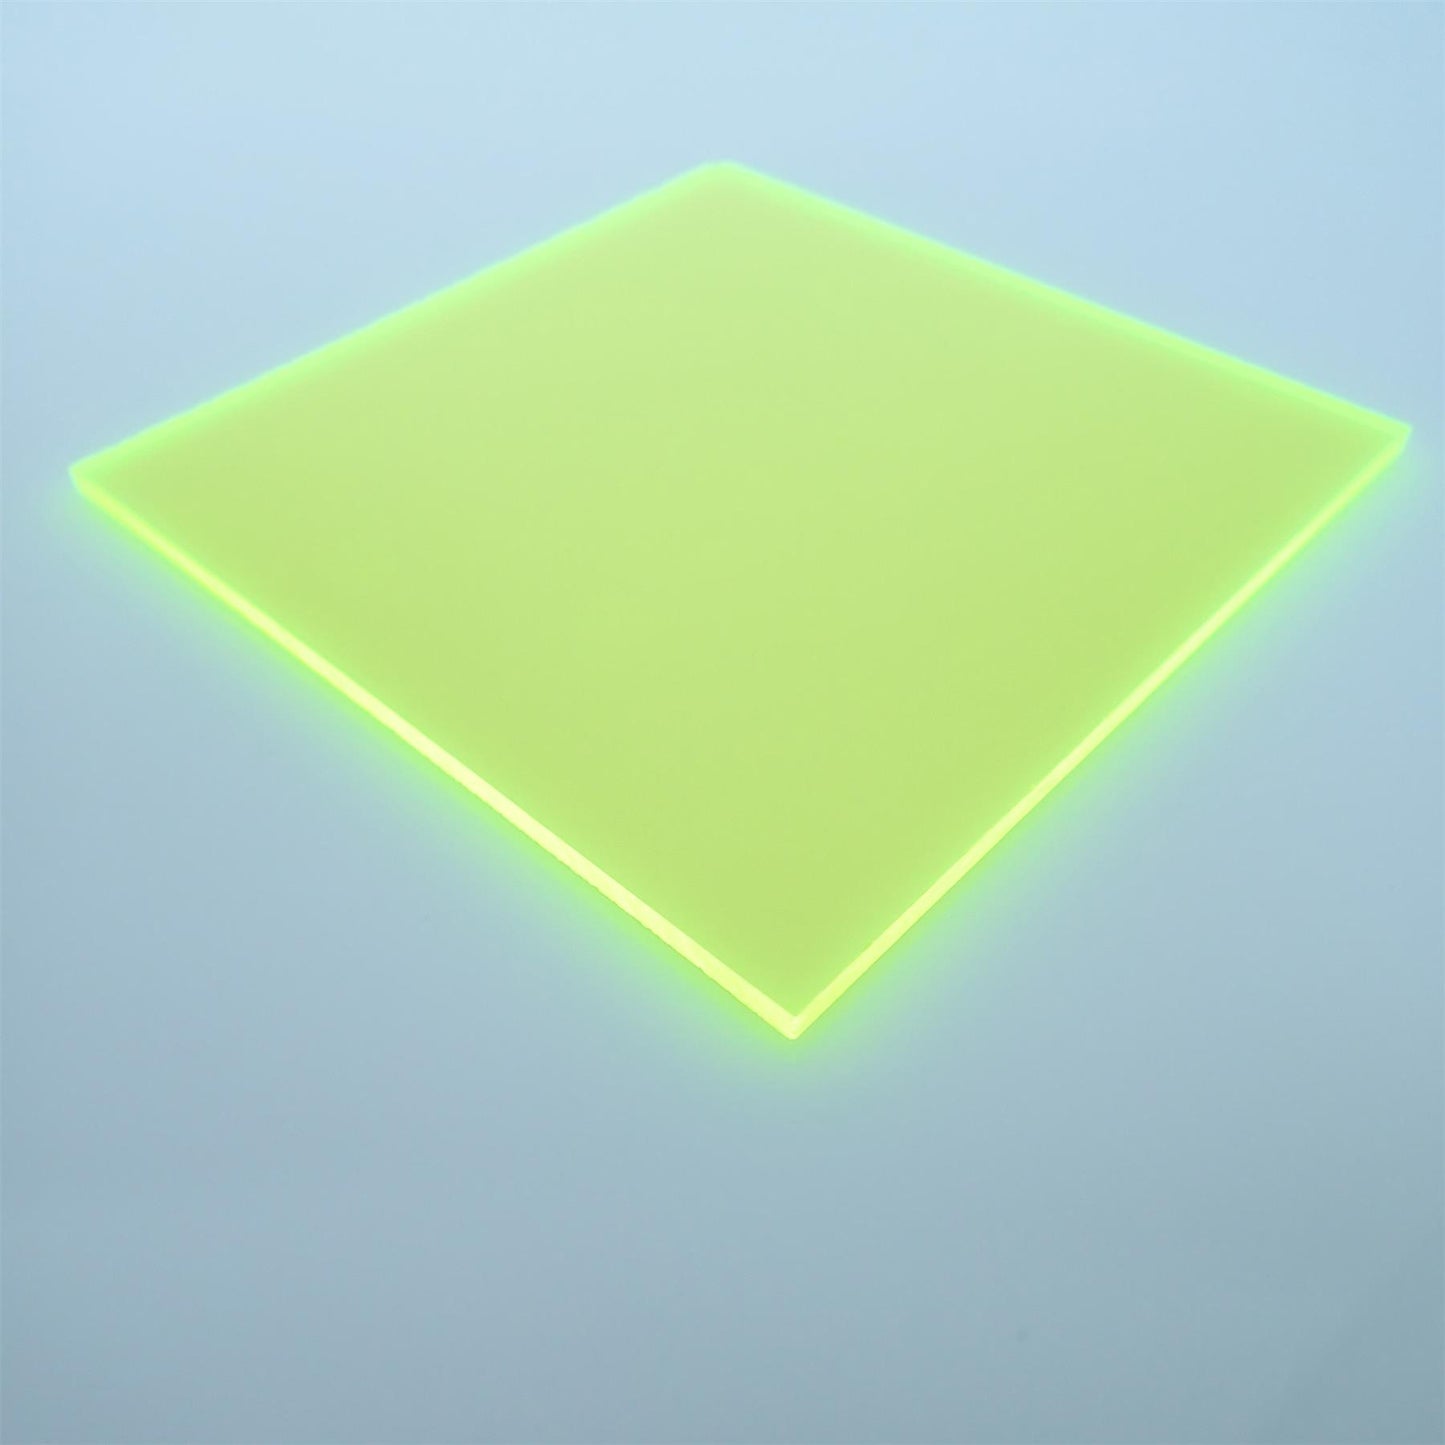 Incudo Chartreuse Fluorescent Acrylic Sheet - 400x300x3mm (15.7x11.81x0.12")